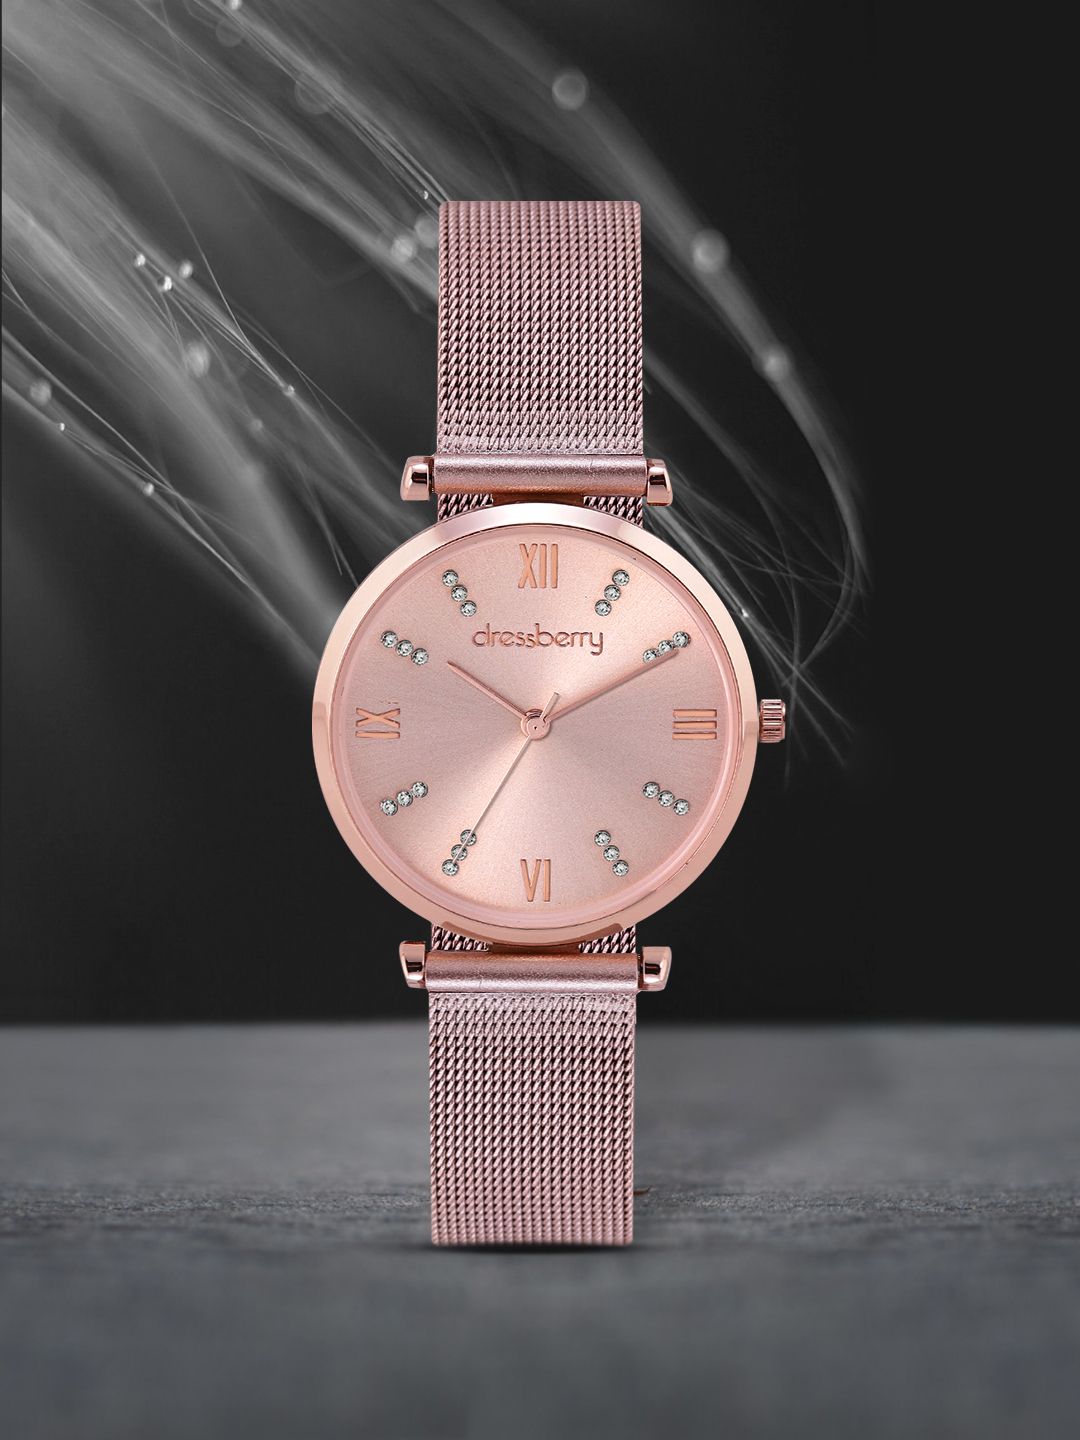 DressBerry Women Rose Gold-Toned Analogue Watch MFB-PN-PFDK2544 Price in India